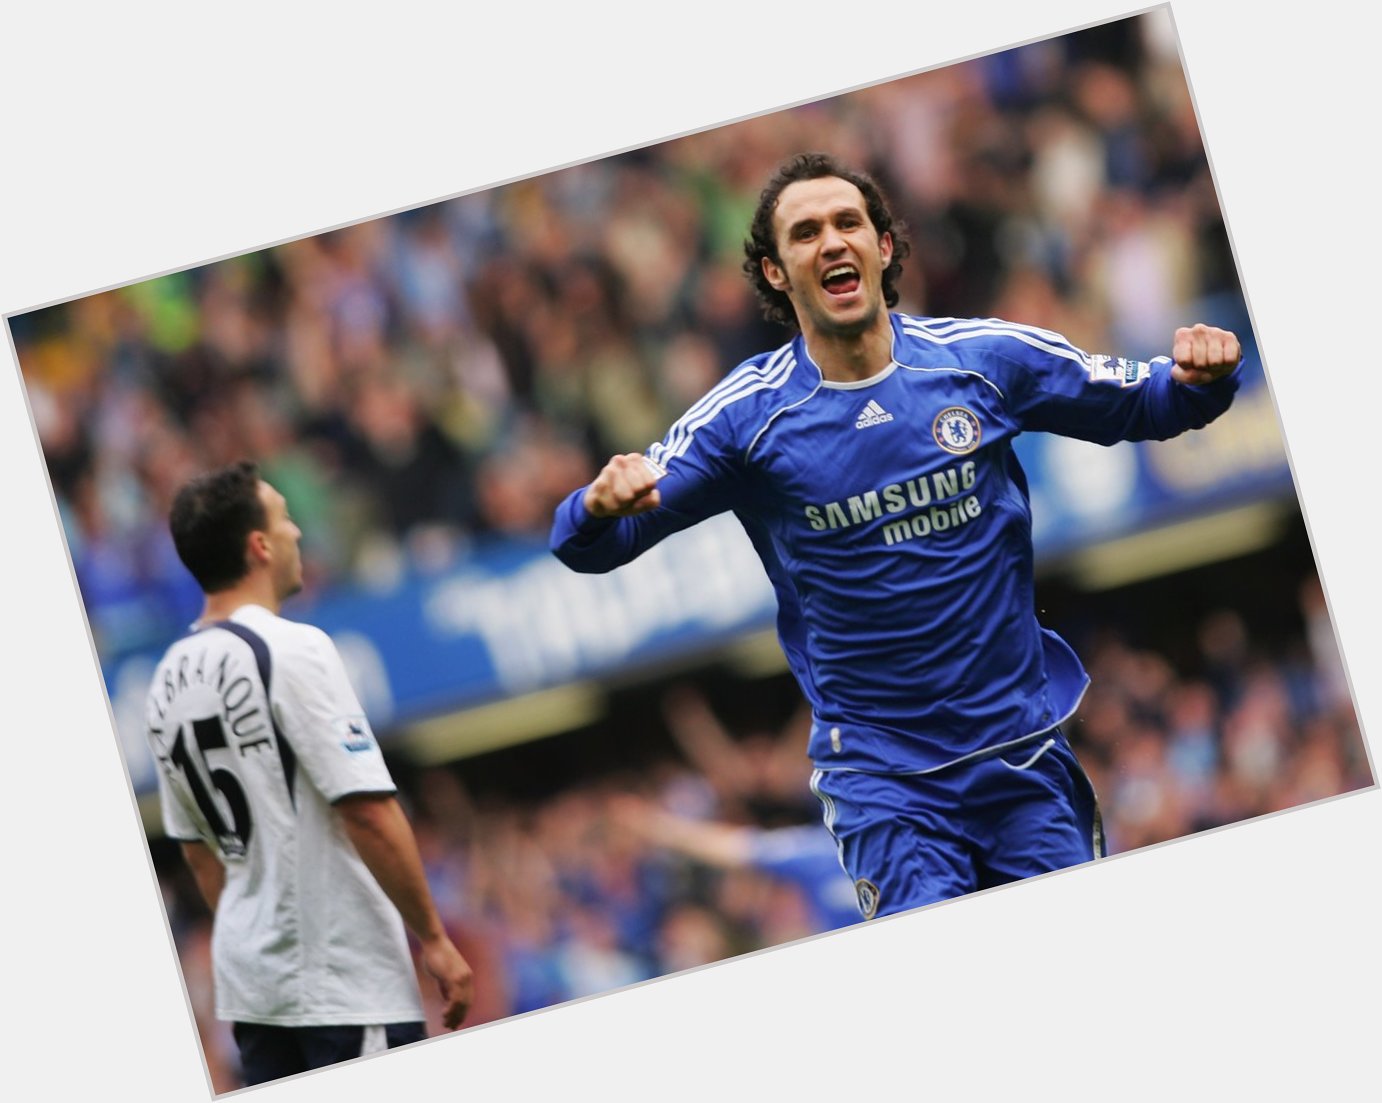 Happy 40th Birthday to the Chelsea legend that is Ricardo Carvalho. 